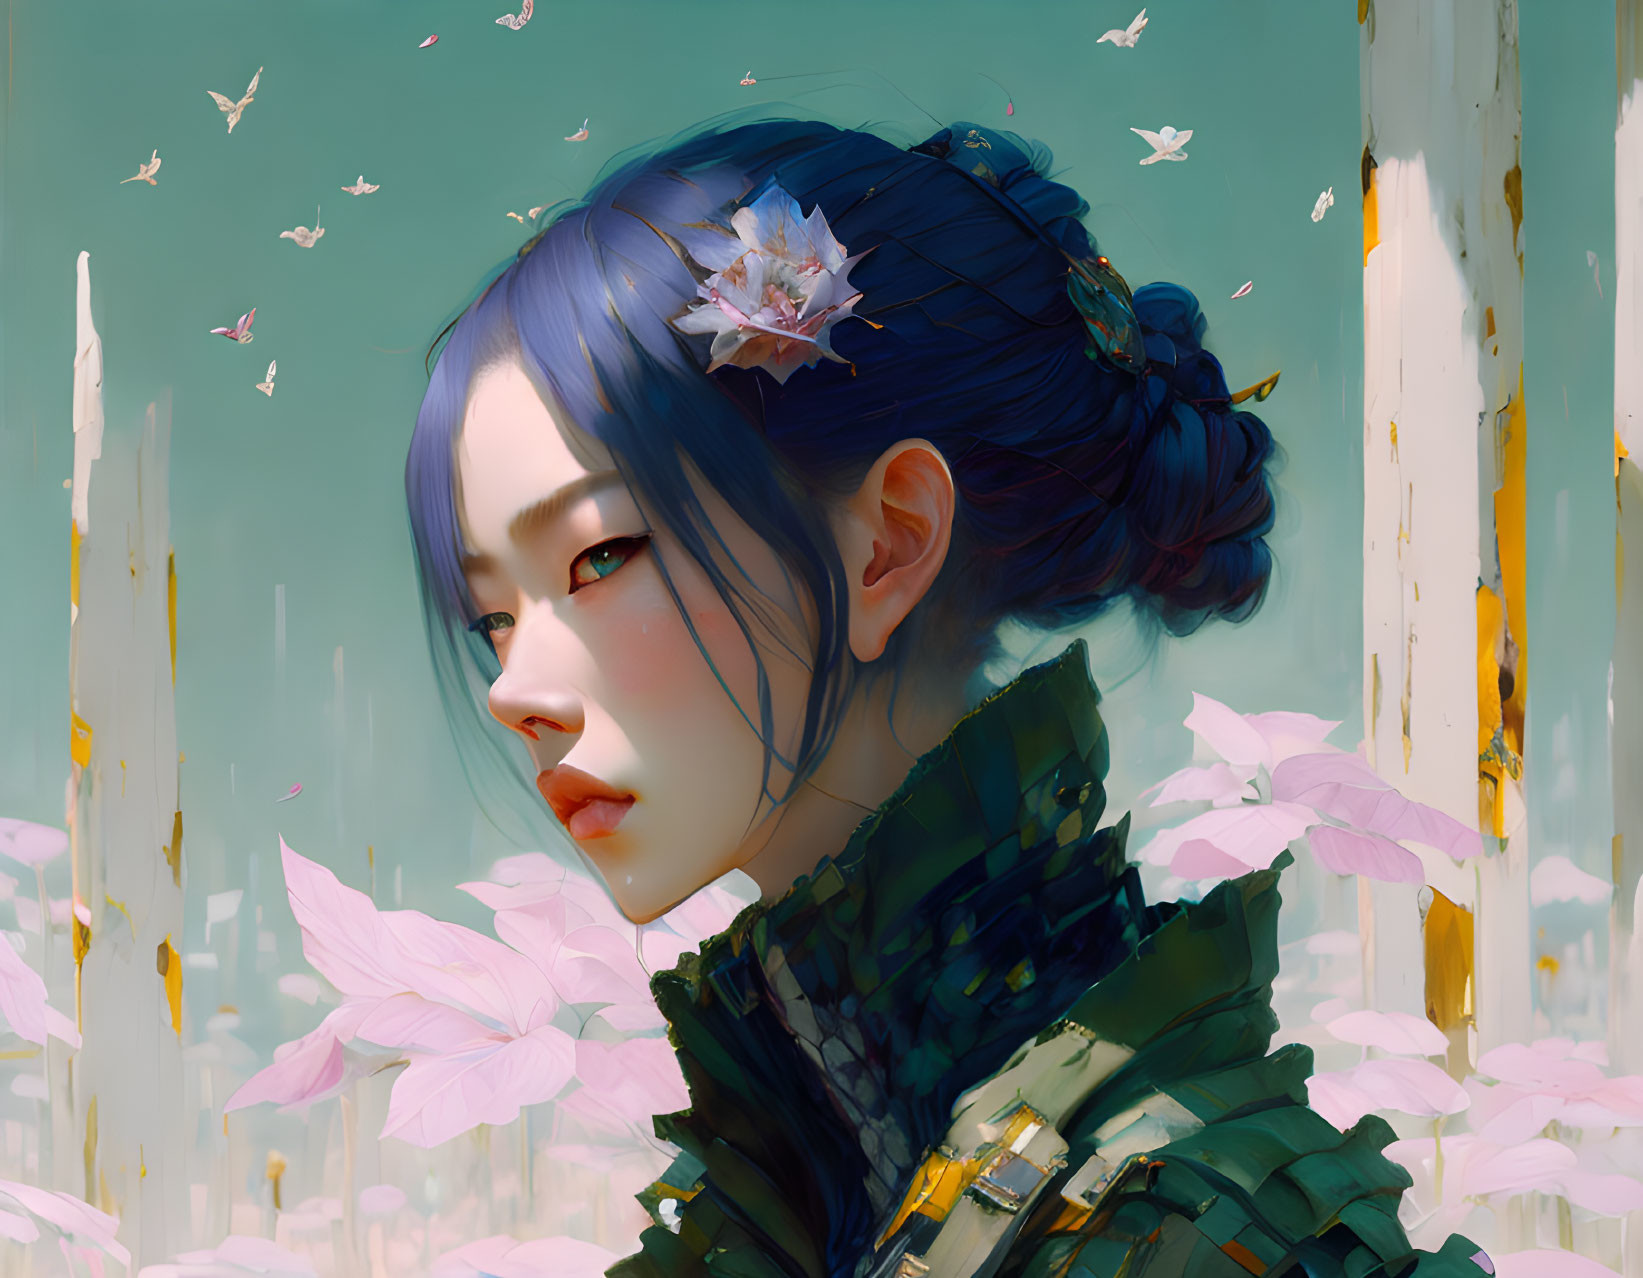 Digital artwork: Woman with blue hair and flower, serene backdrop with birds and pink flowers.